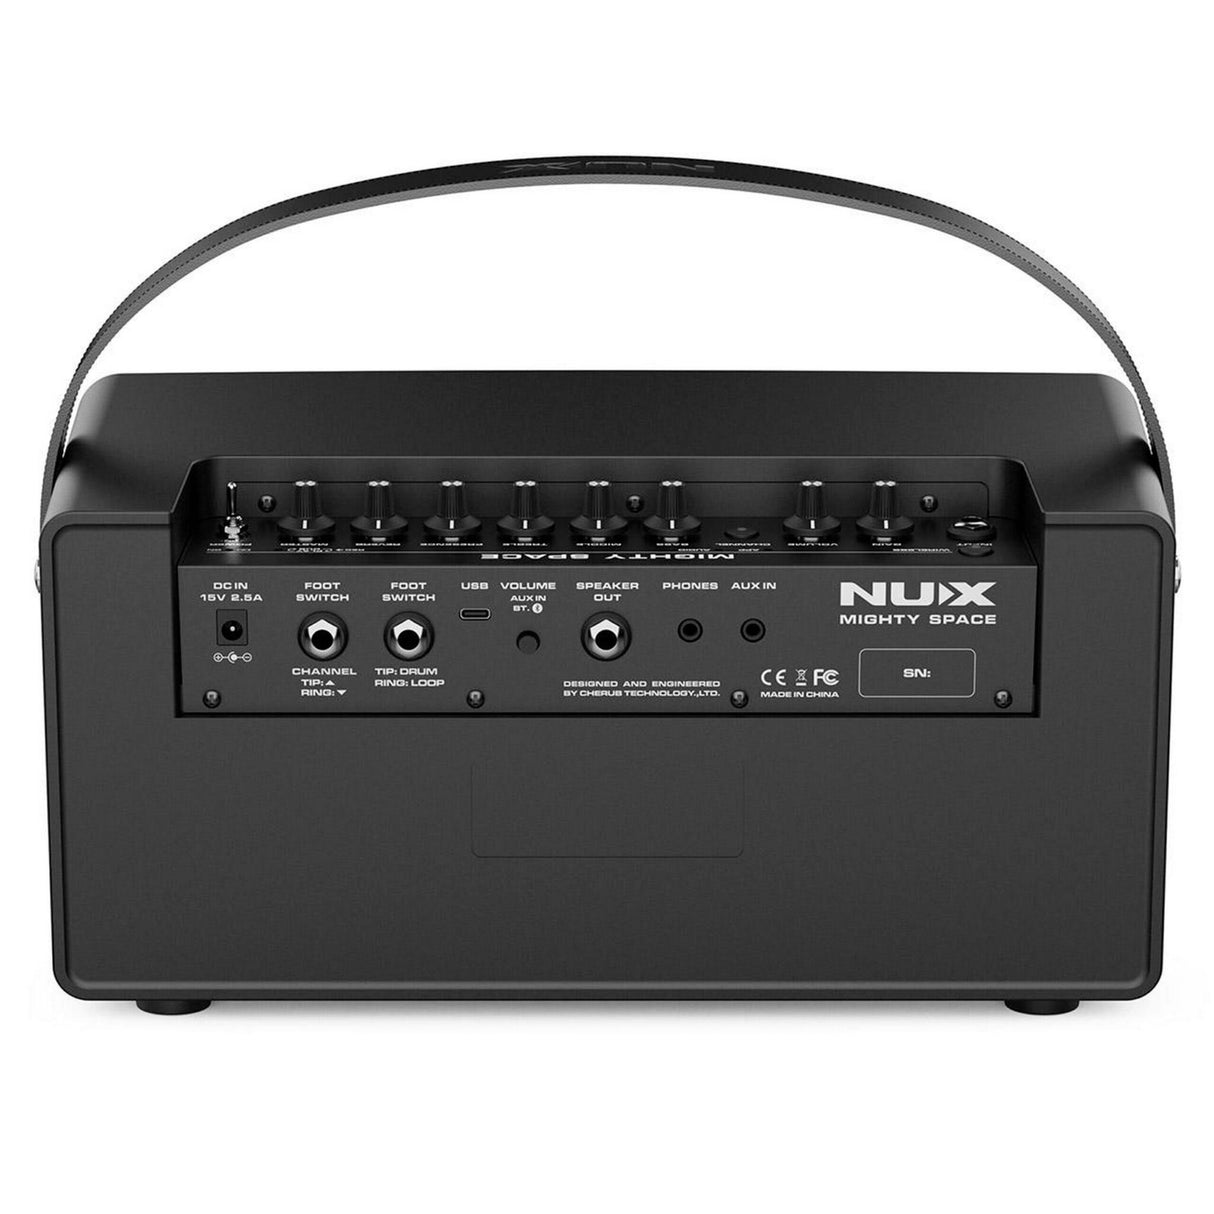 NUX Mighty Space 30W Wireless Portable Stereo Guitar Amp